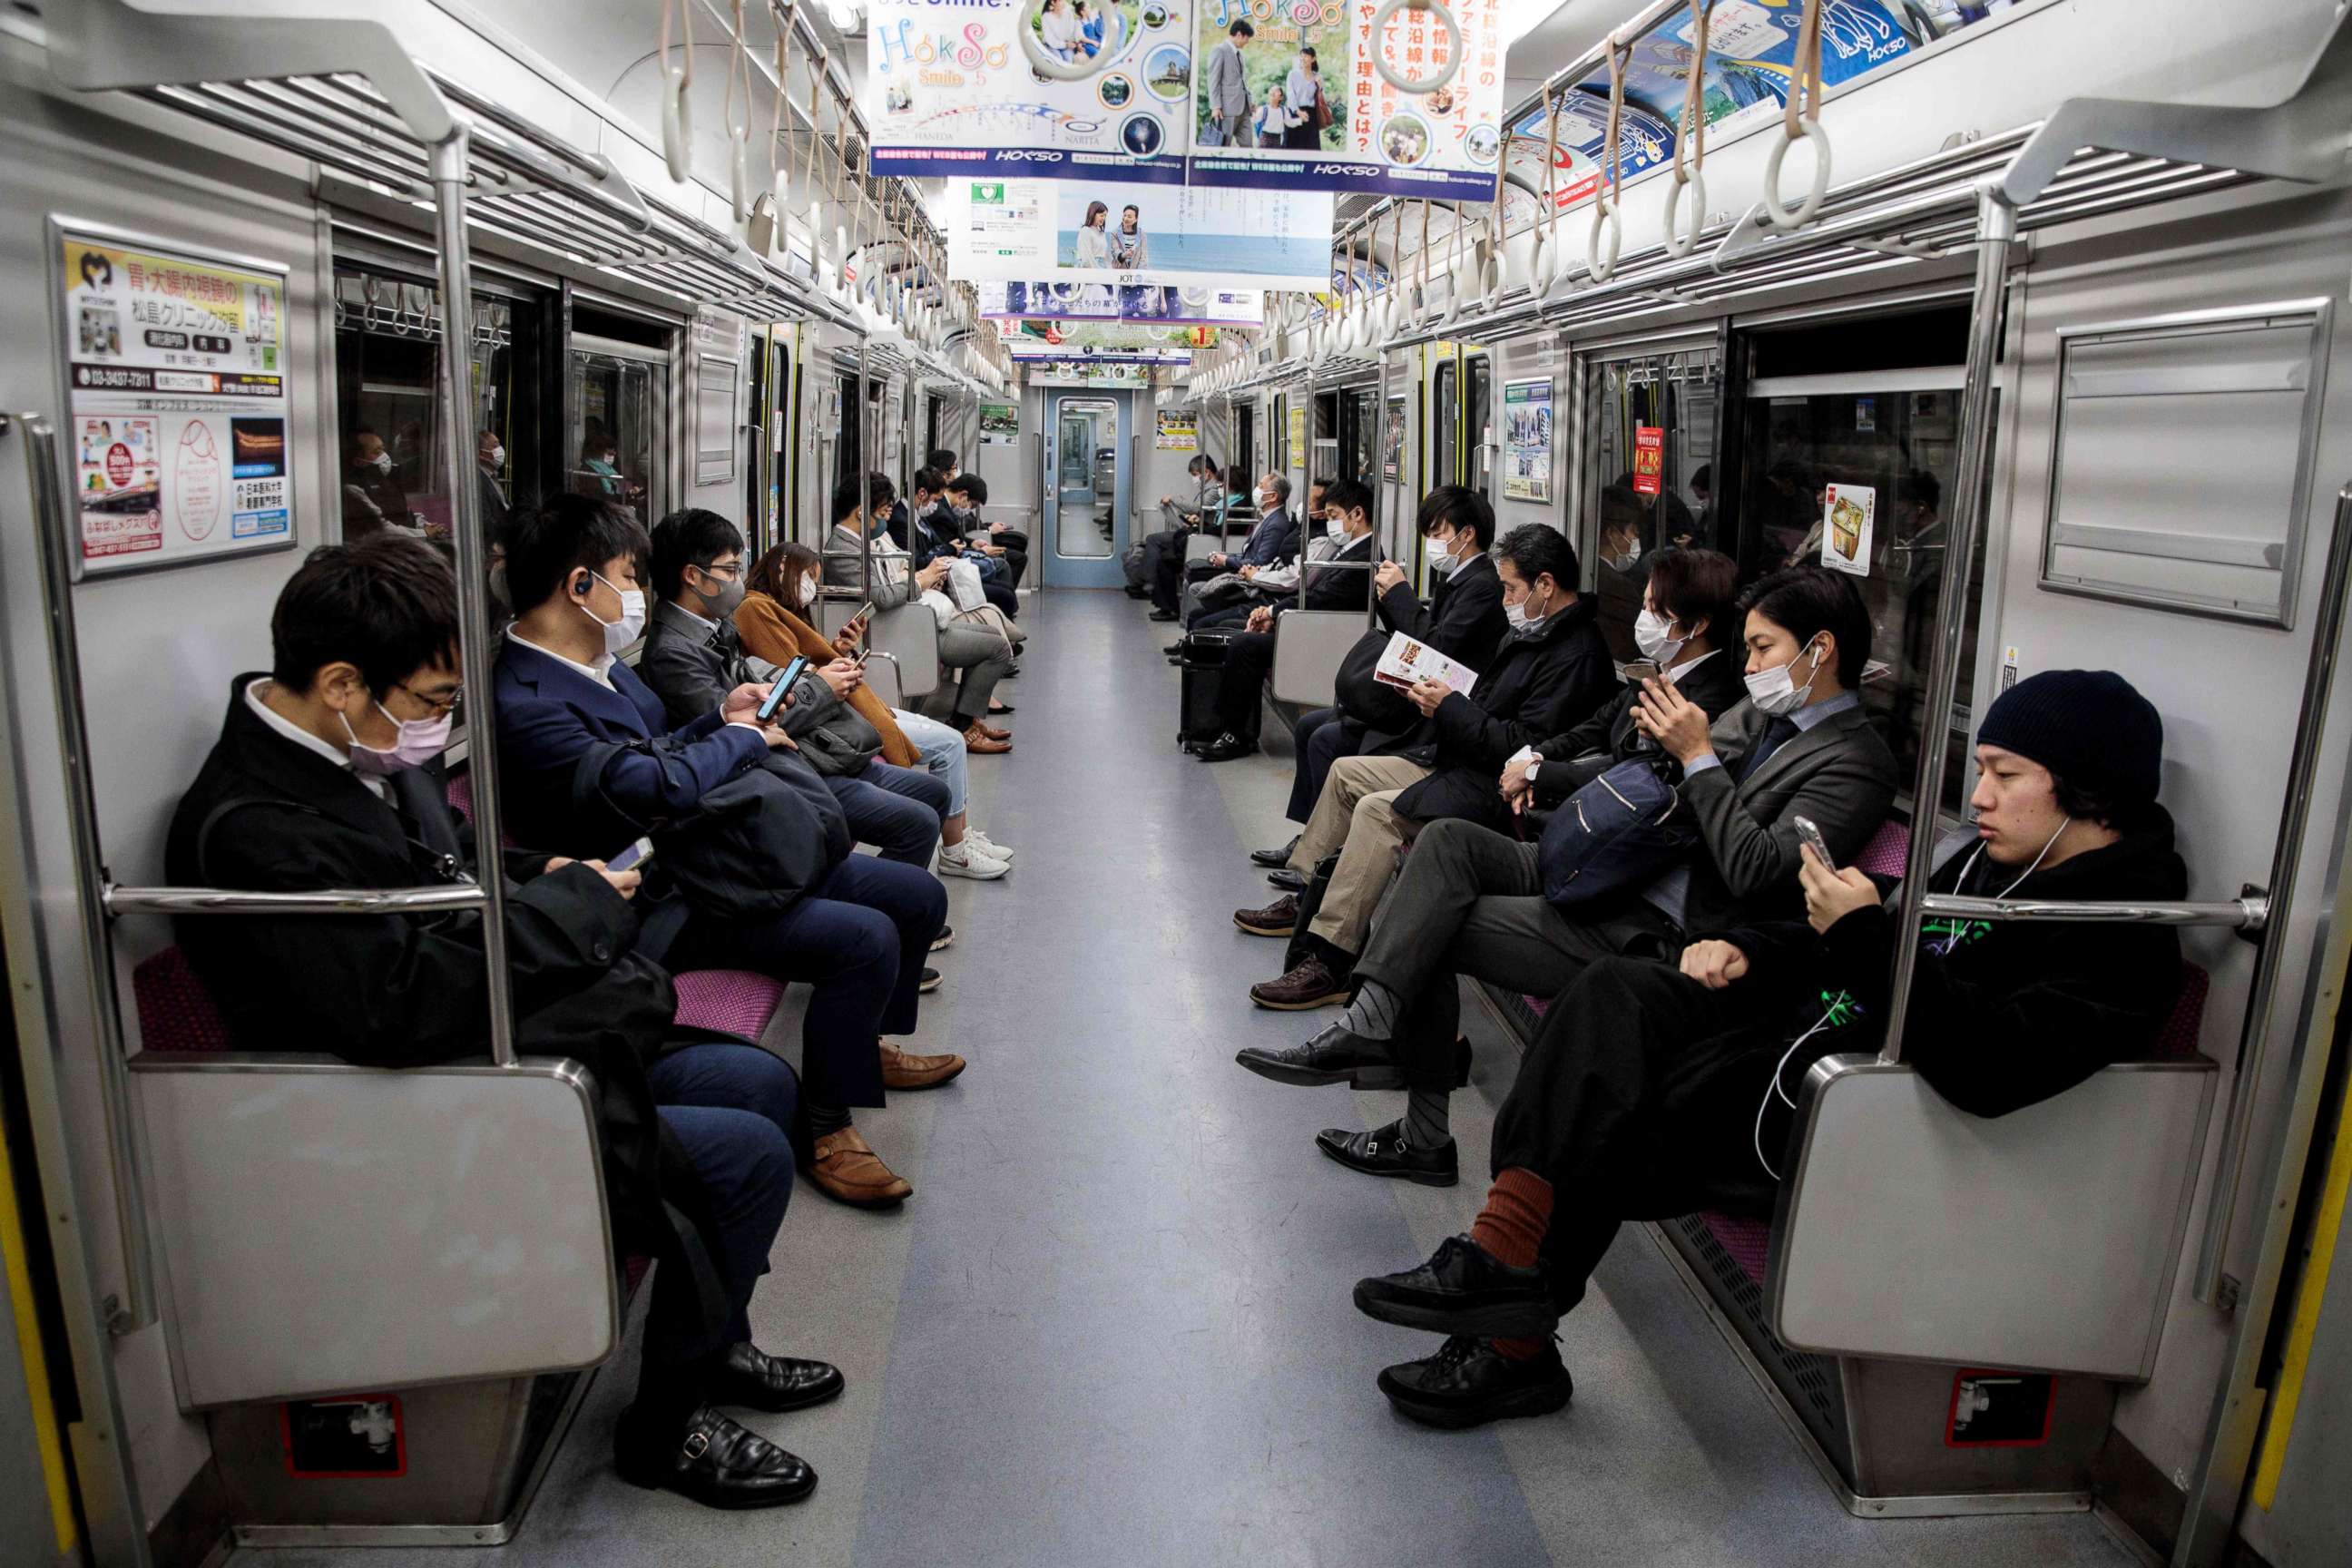 PHOTO: People wearing face masks amid concerns over the spread of the novel coronavirus commute on a train in Tokyo, Japan, on April 6, 2020.